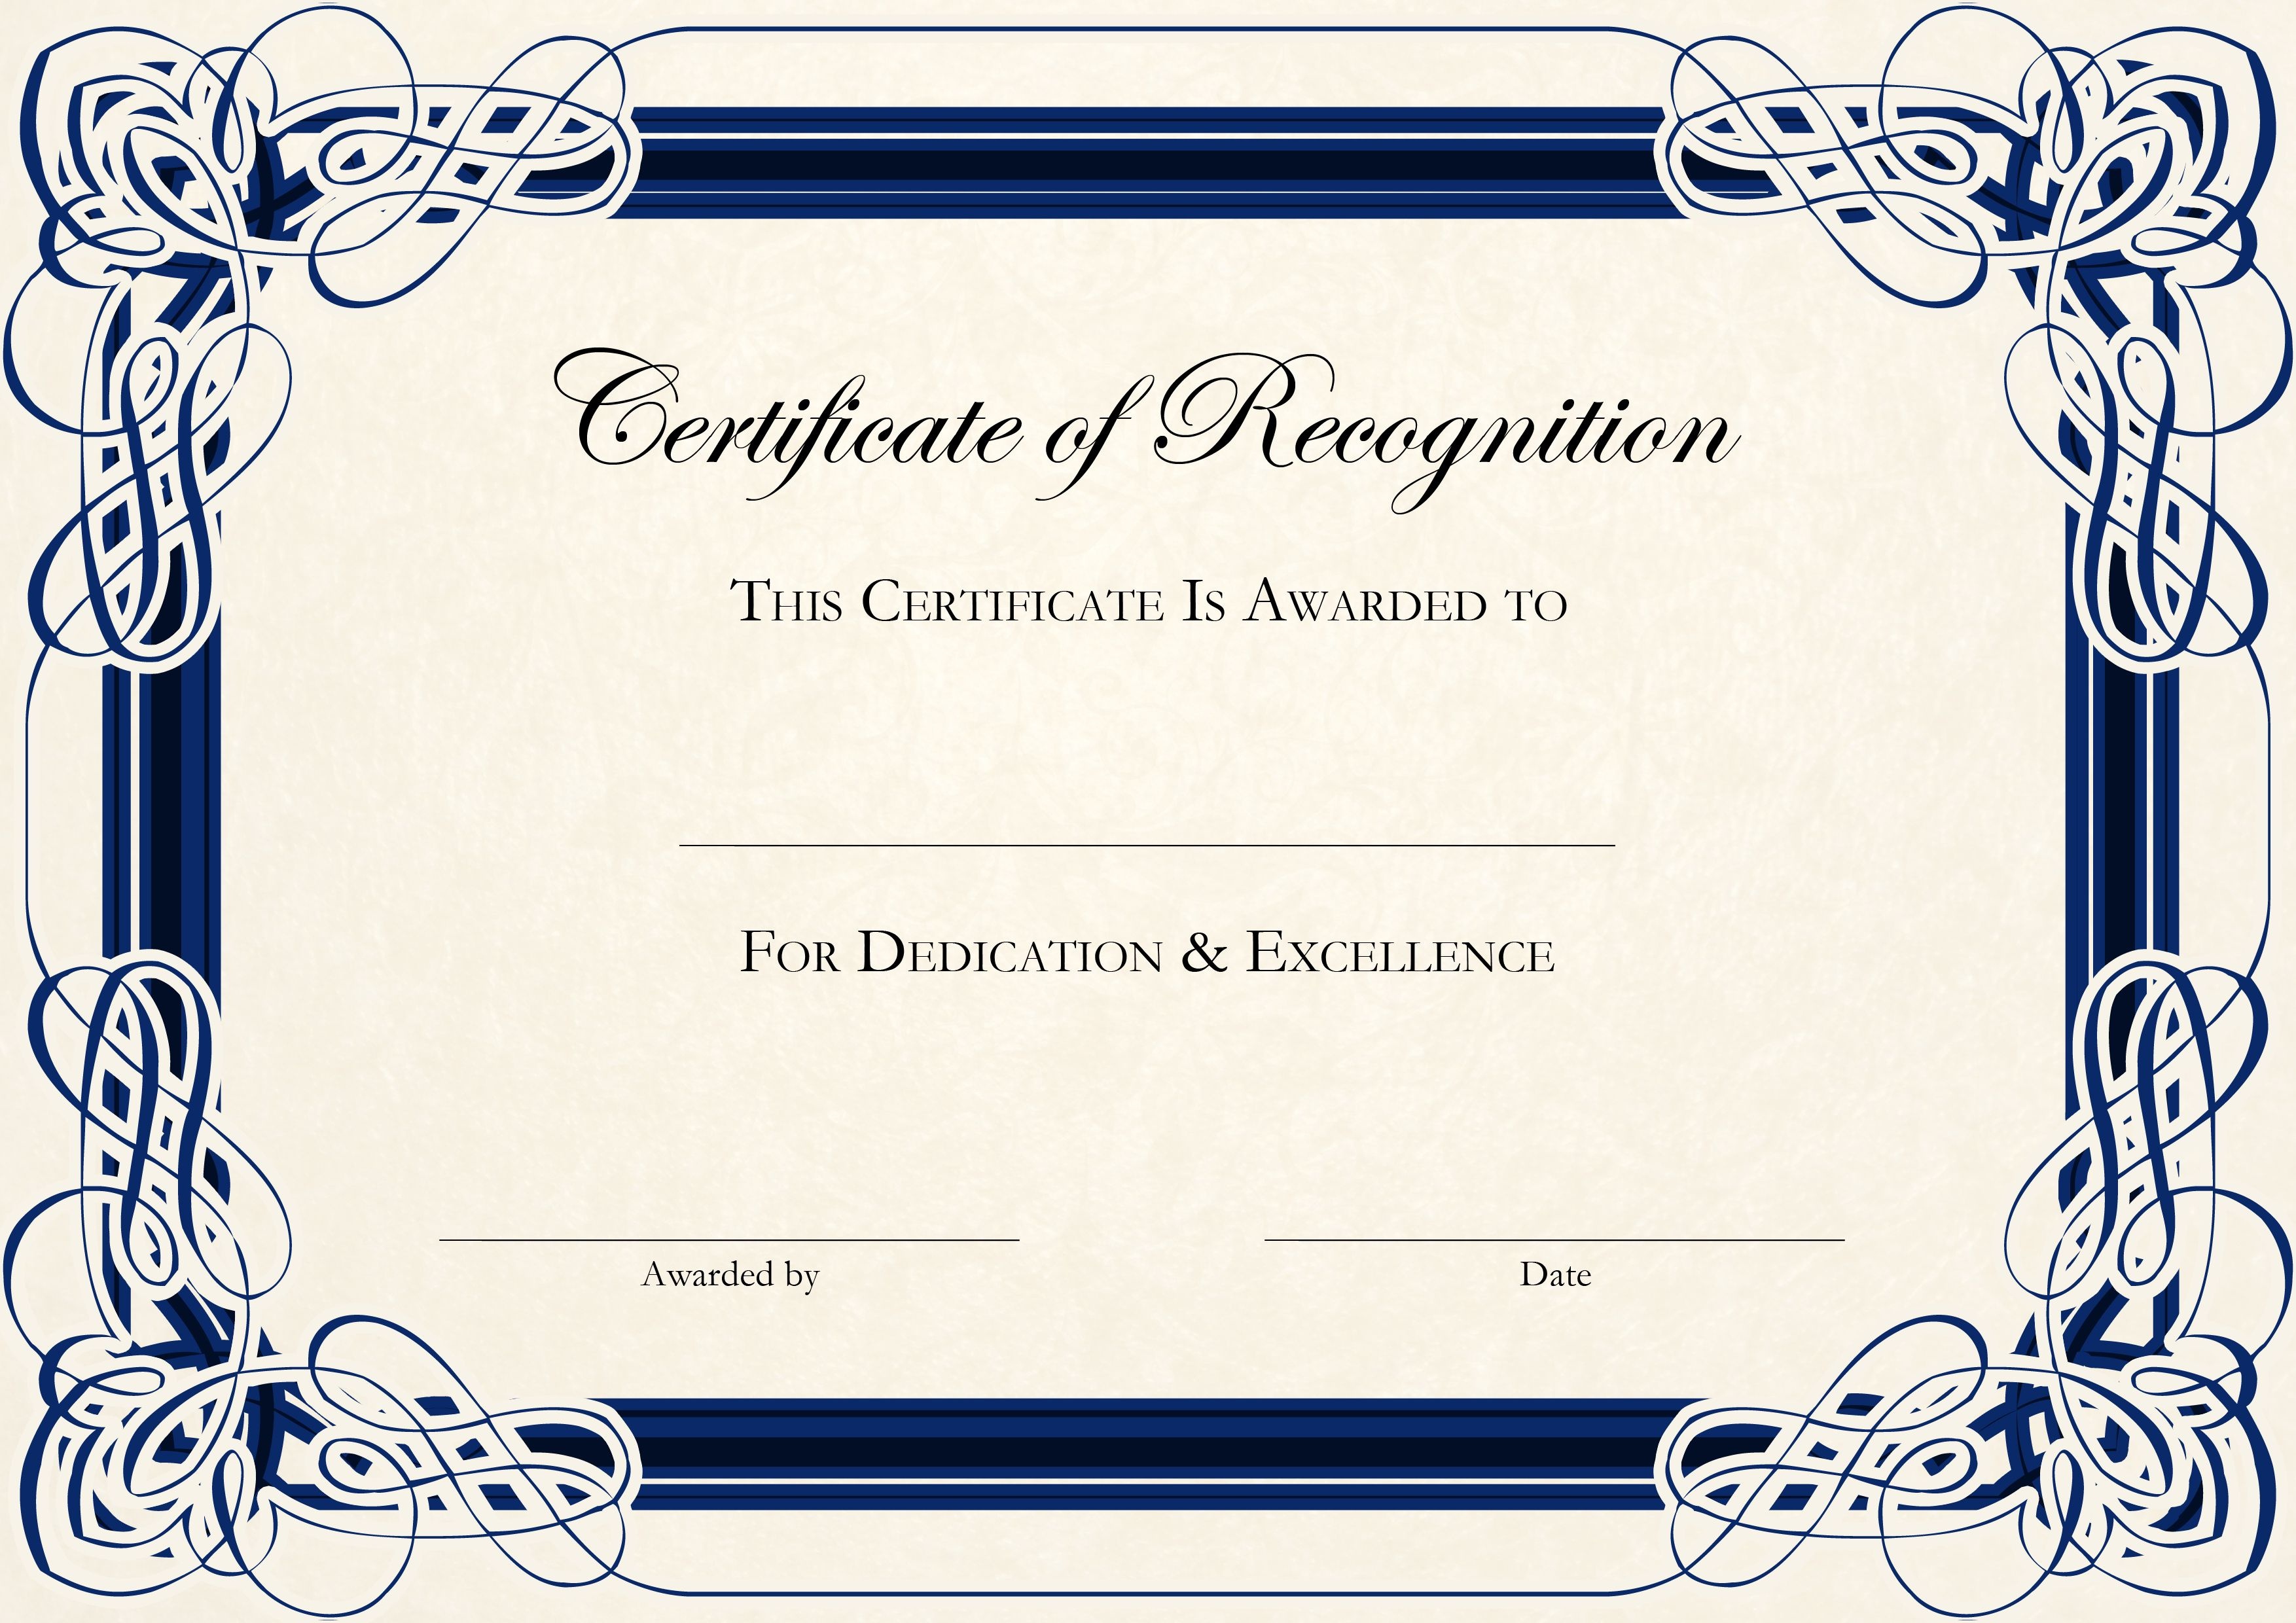 Download Blank Certificate Template X3Hr9Dto St Gabriel s Youth